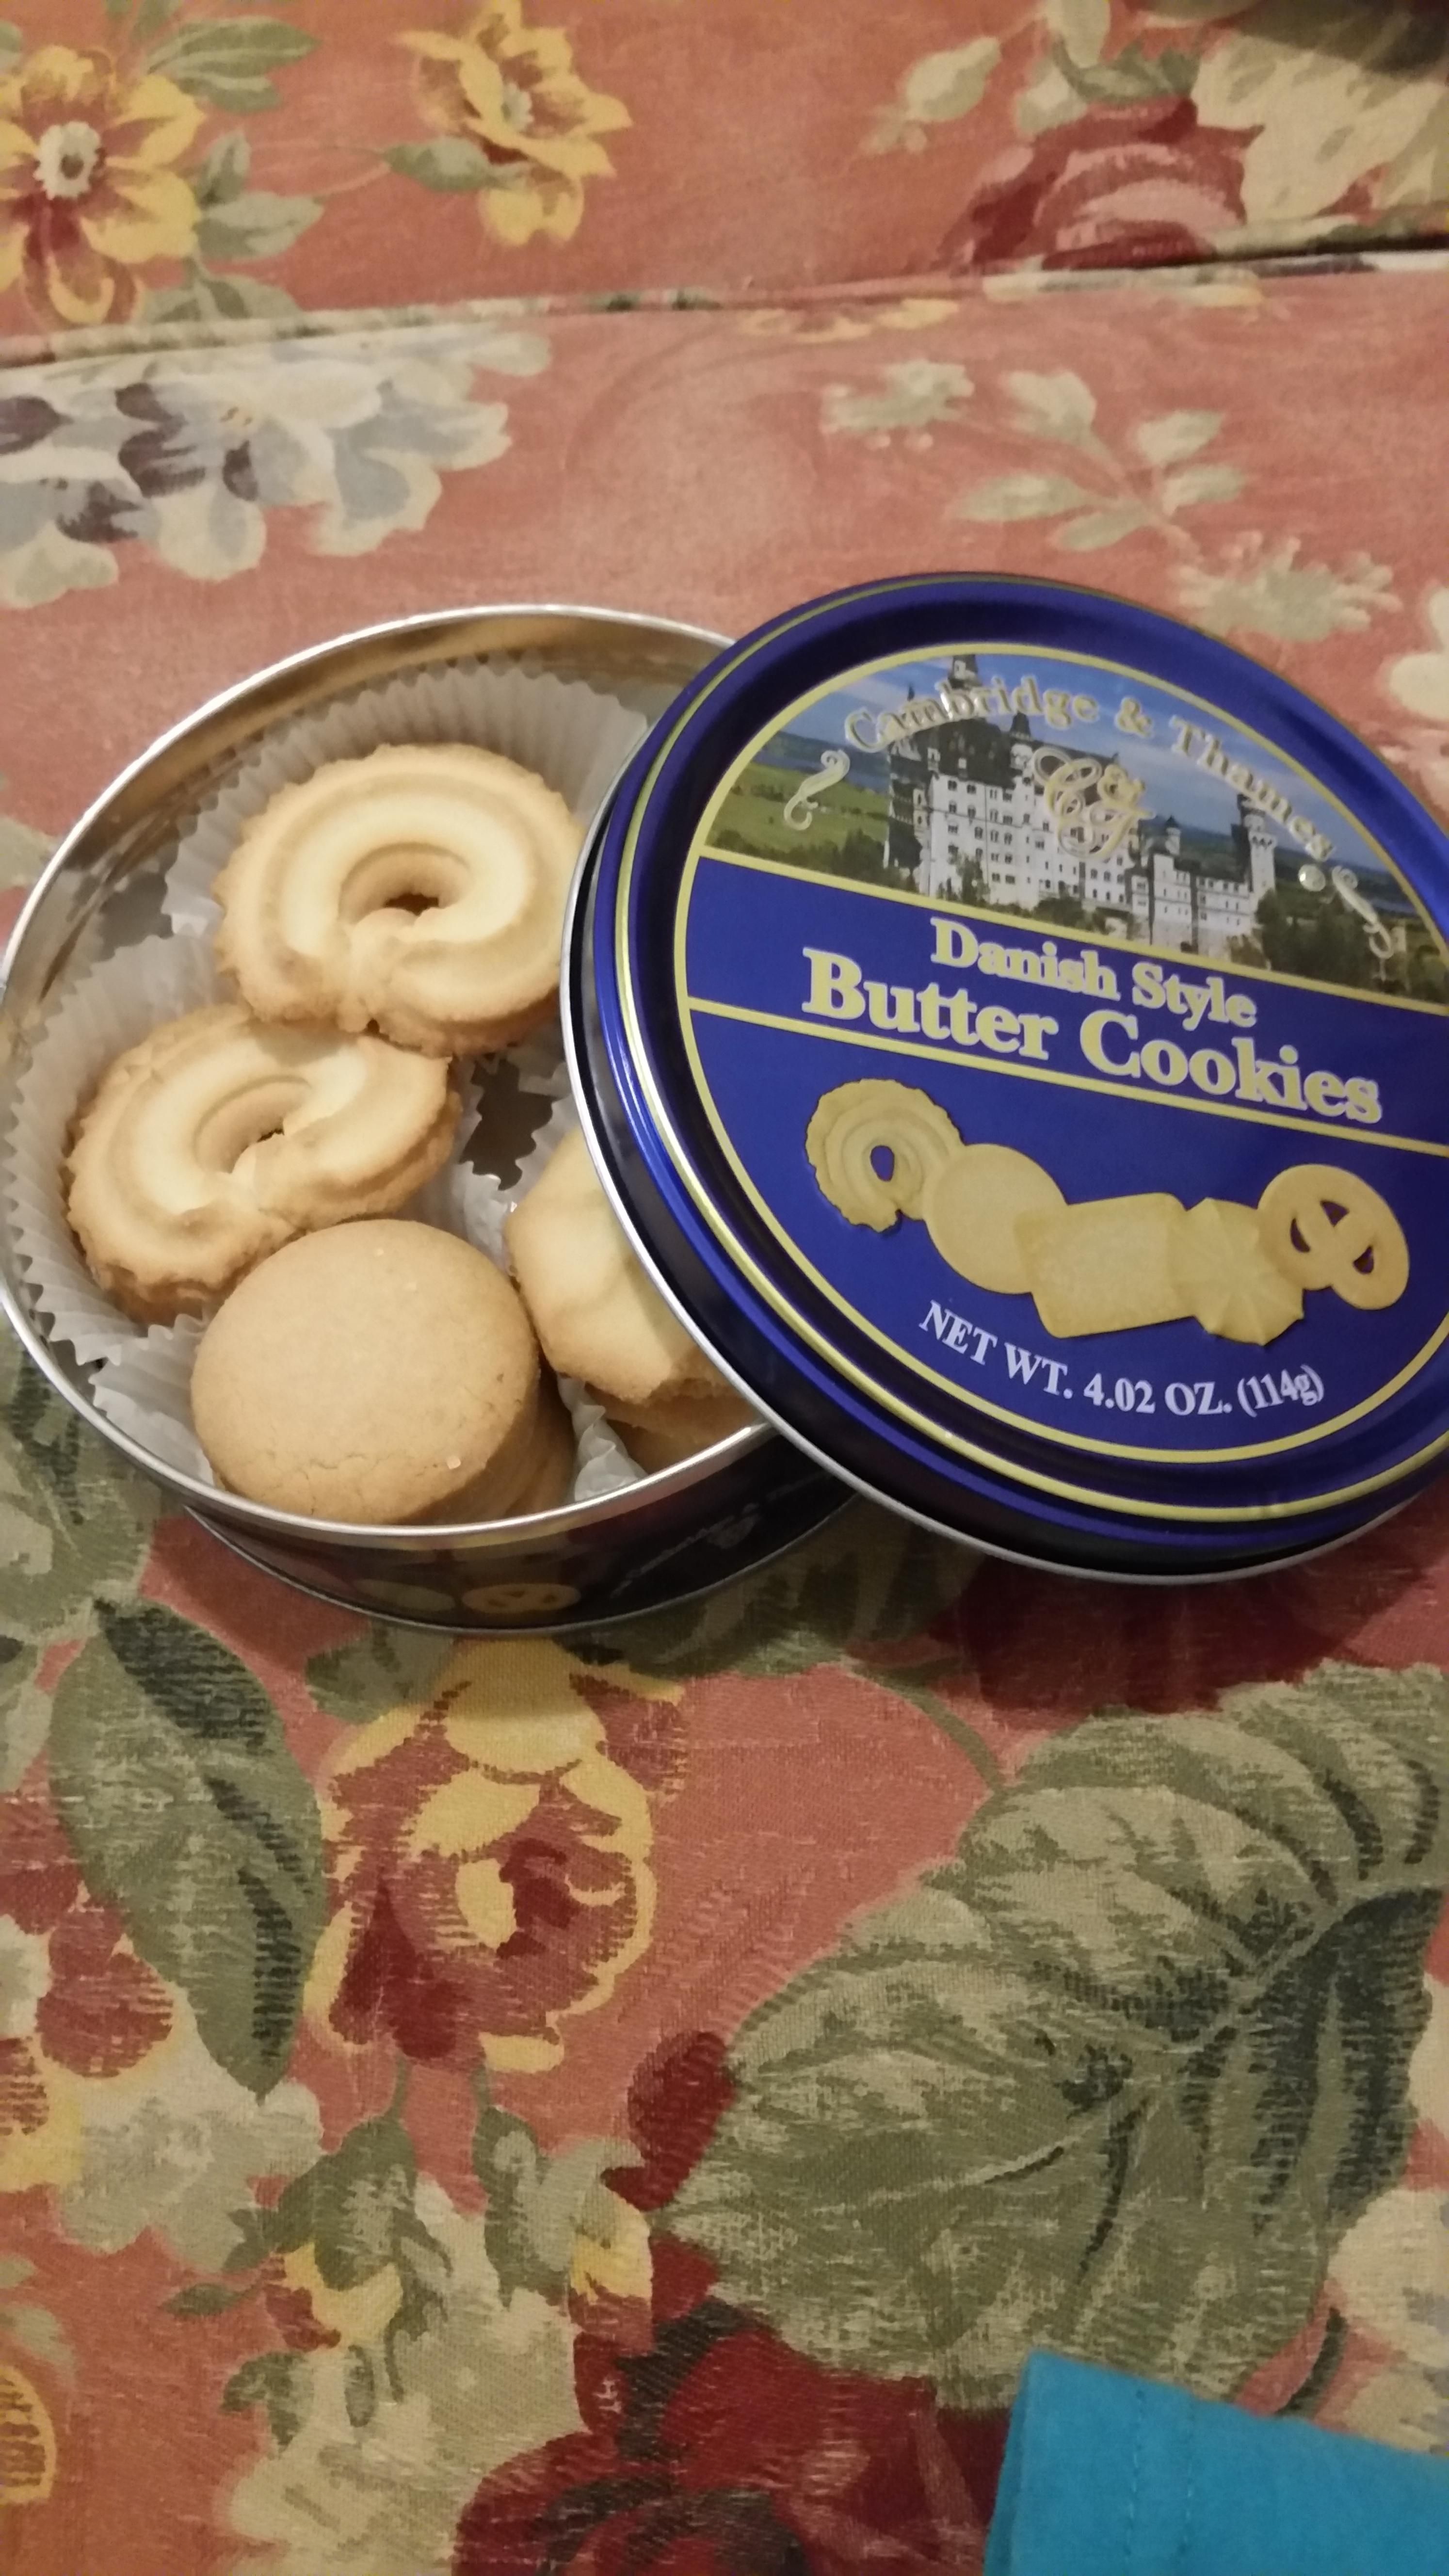 Last time I buy a sewing kit from the dollar store!